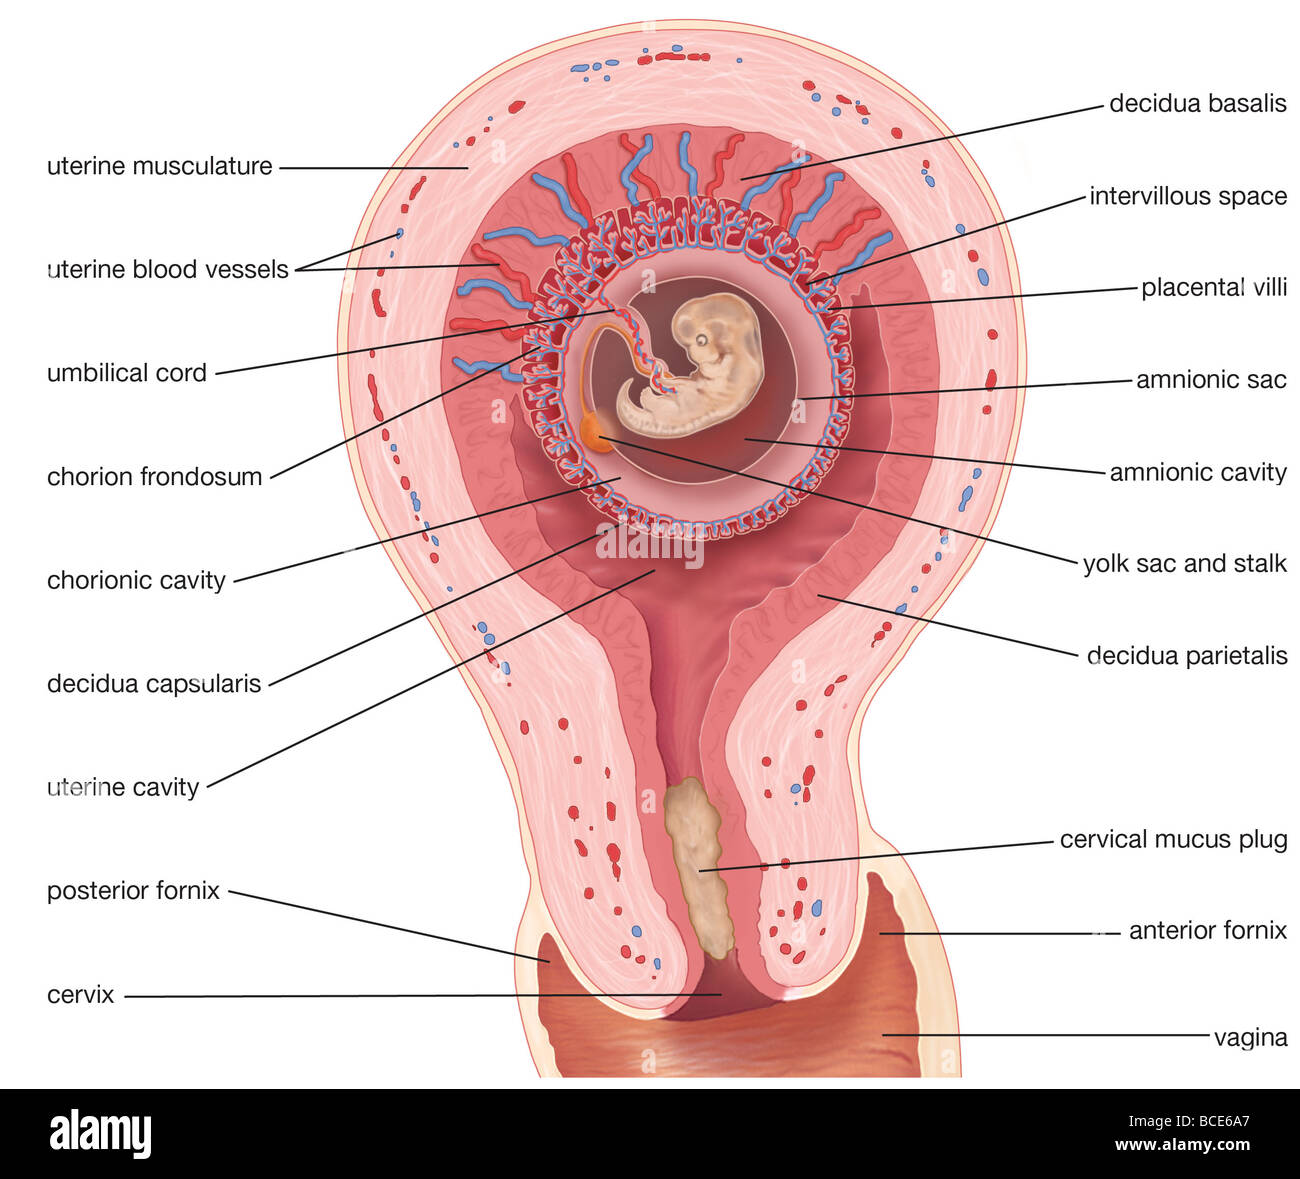 Diagram Of Human Uterus During The Seventh Week Of Pregnancy. and. 